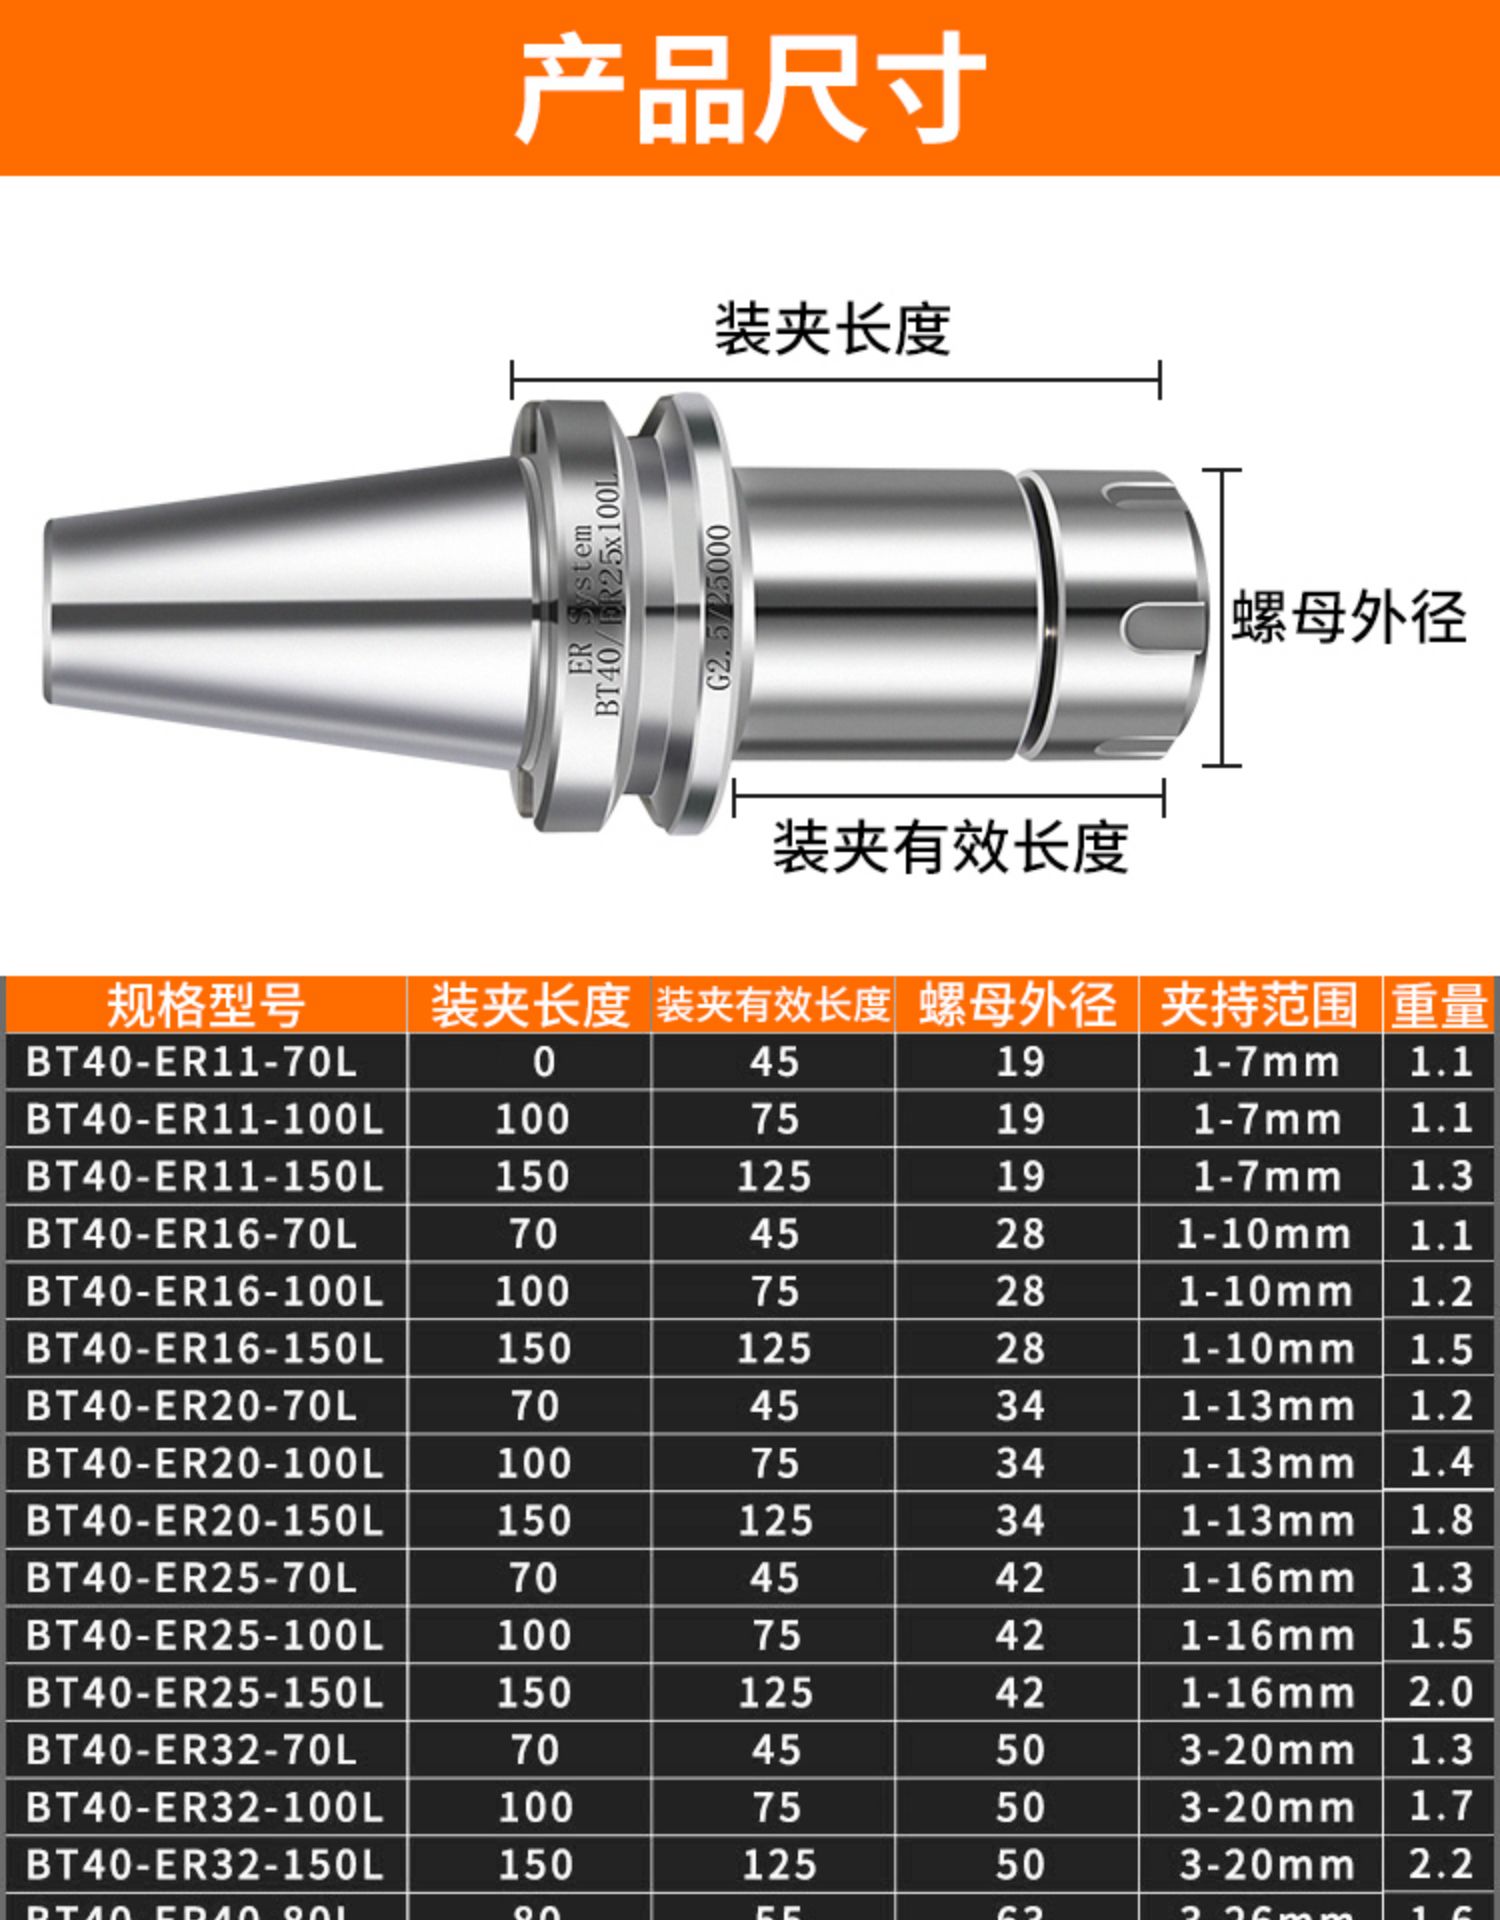 tool holder for milling machine specification